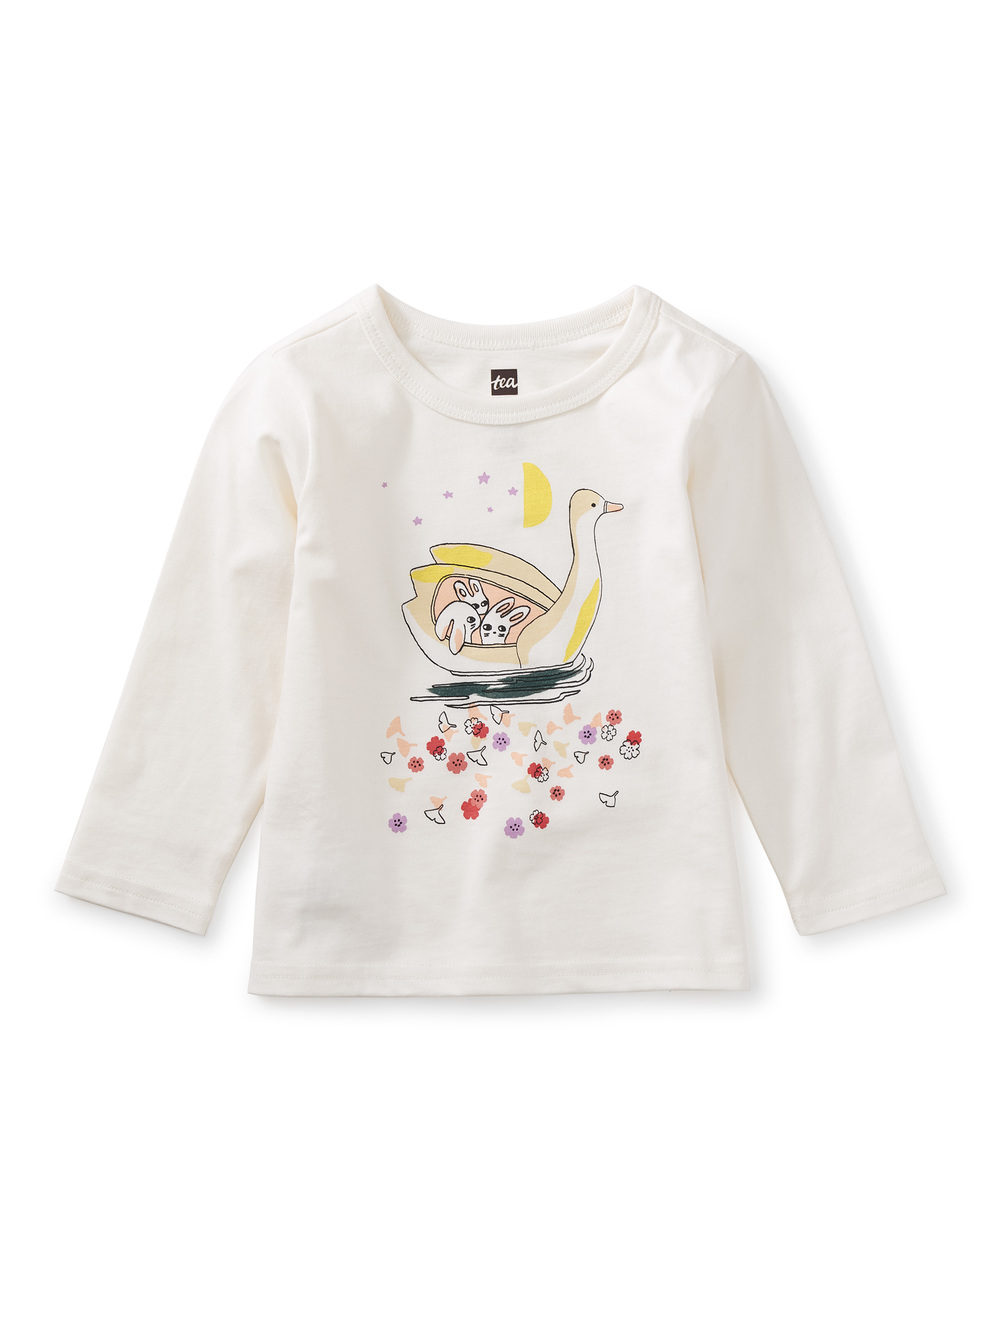 Swan Boat Baby Graphic Tee